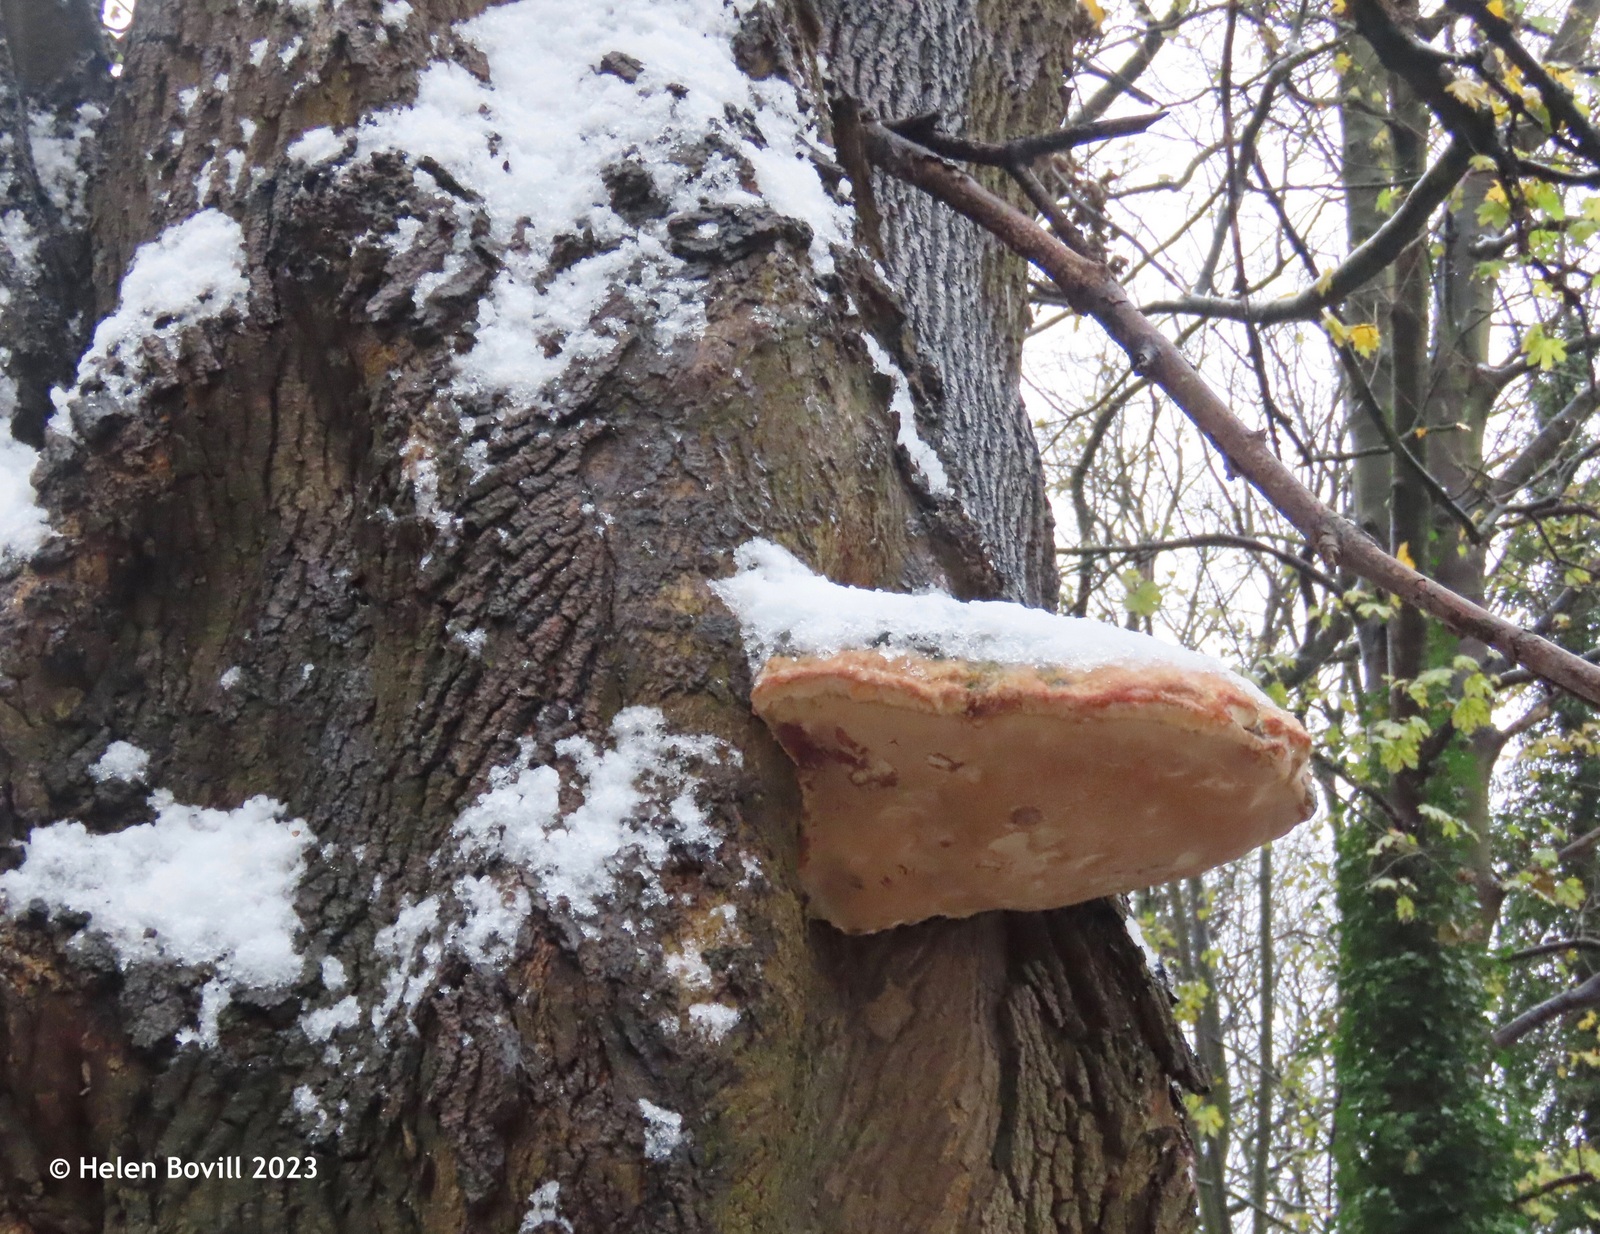 A large bracket fungus growing on a tree in the cemetery, with a light dusting of snow